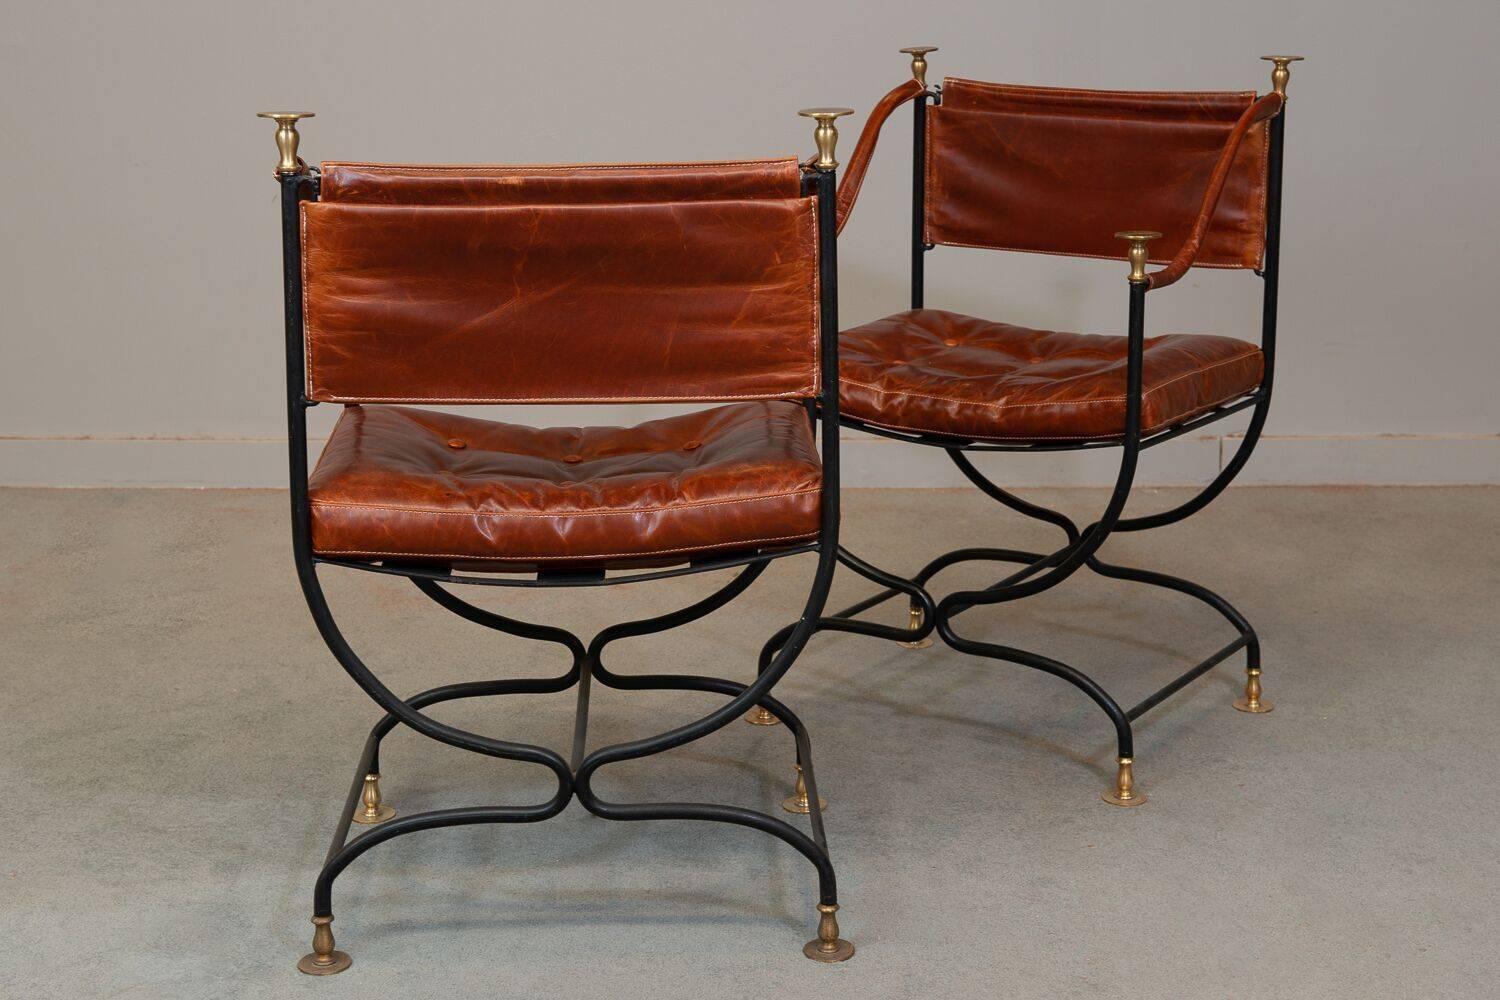 1950s Italian leather, brass and iron campaign chairs. New leather upholstery. Measures: Arm height 26.75